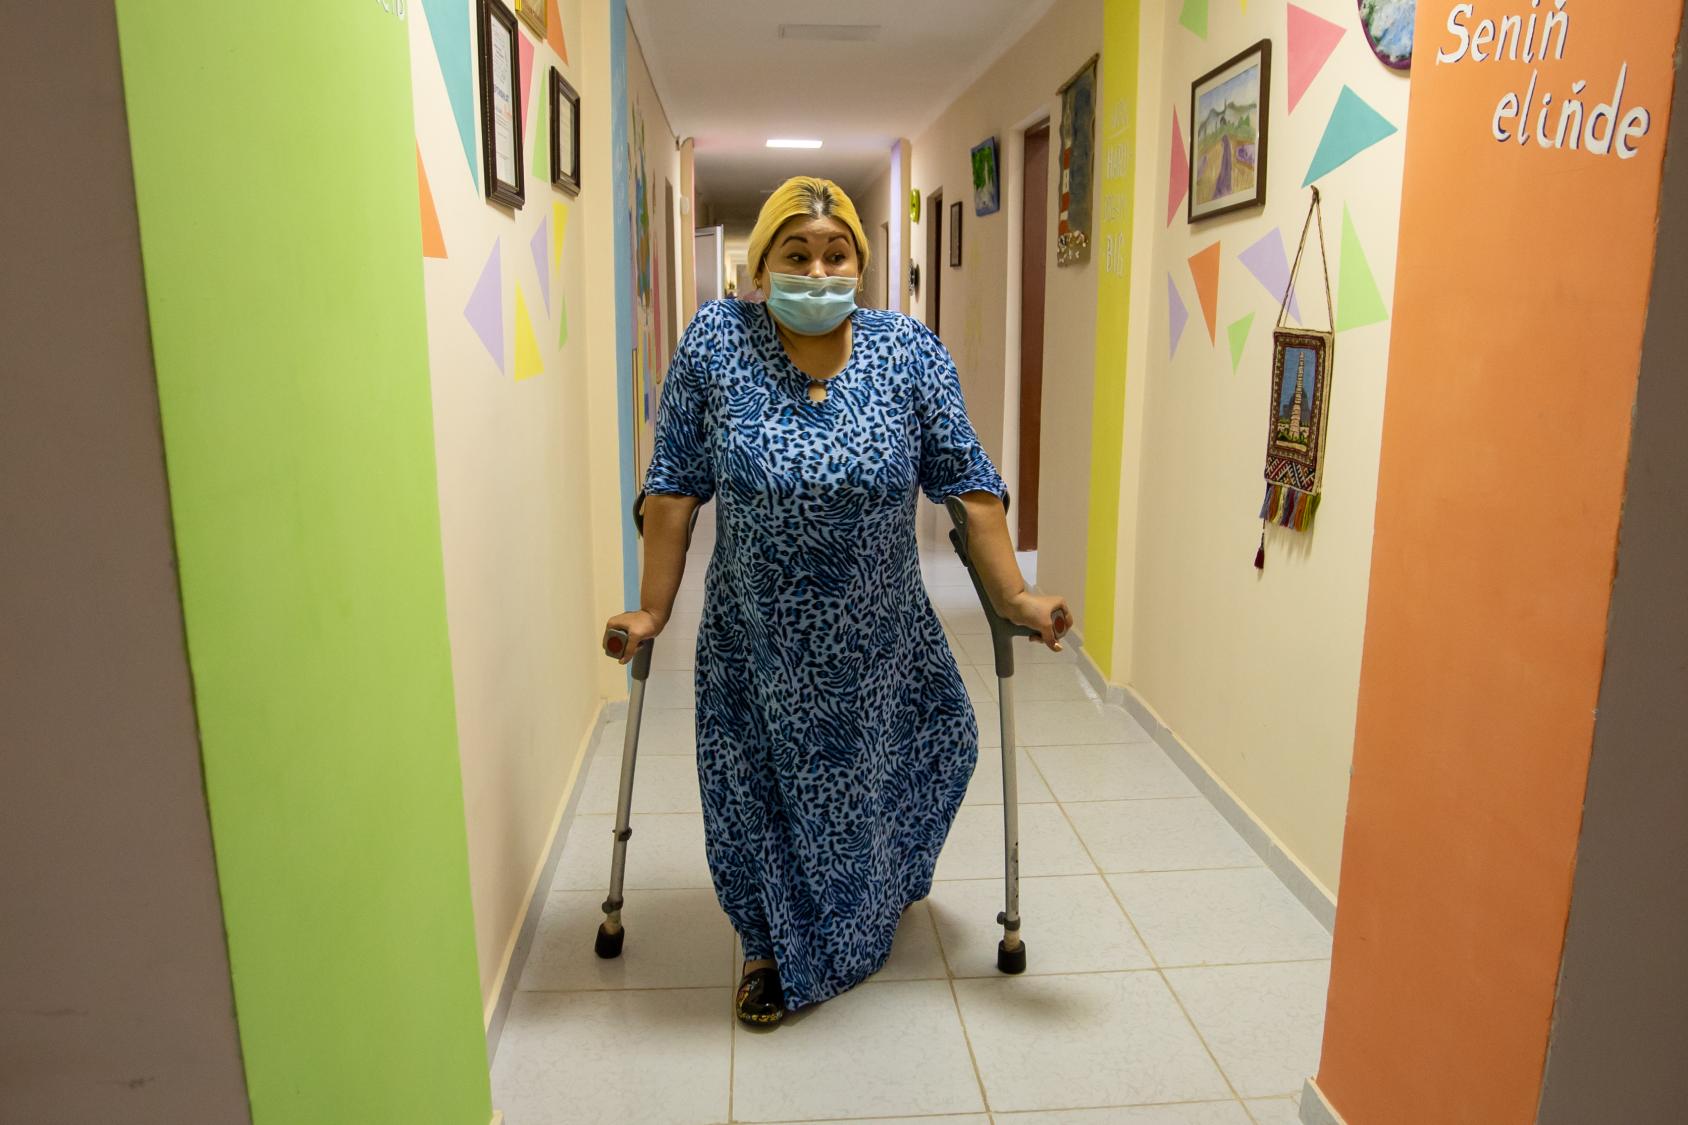 A woman walks down a colorful hallway with crutches.